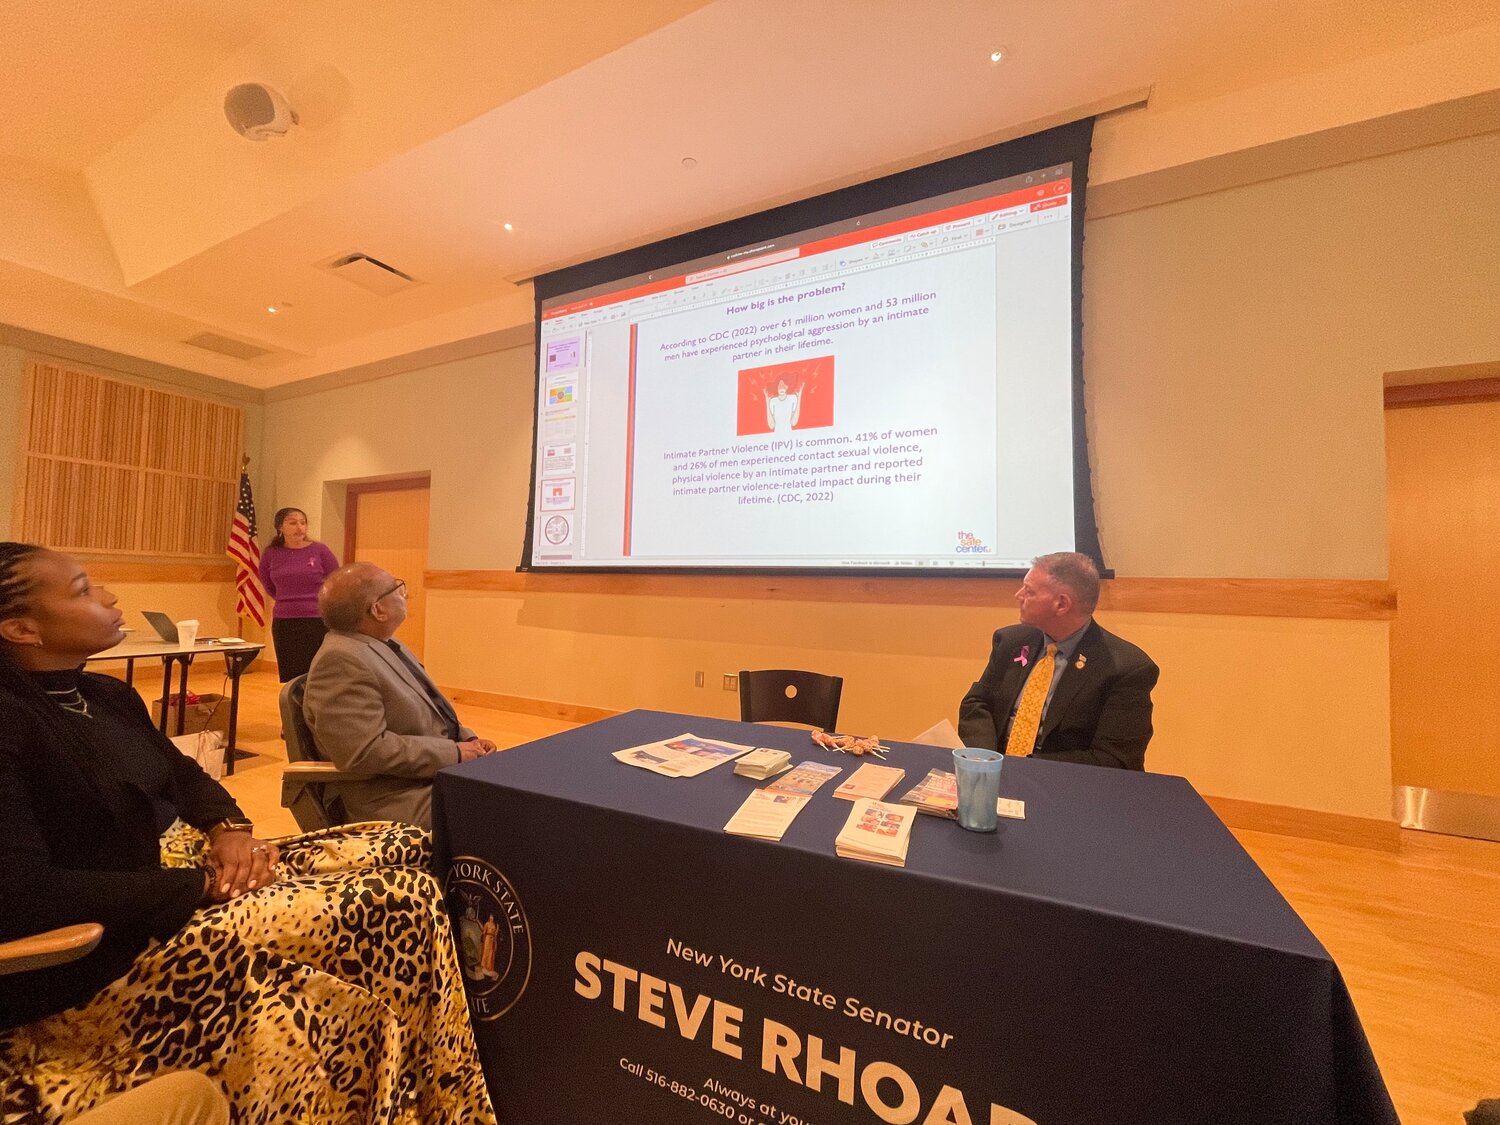 The East Meadow Public Library hosted an informational domestic violence program brought to Nassau County residents by state senators Steve Rhoads and Jack Martins to discuss the importance of The Safe Center LI’s work.